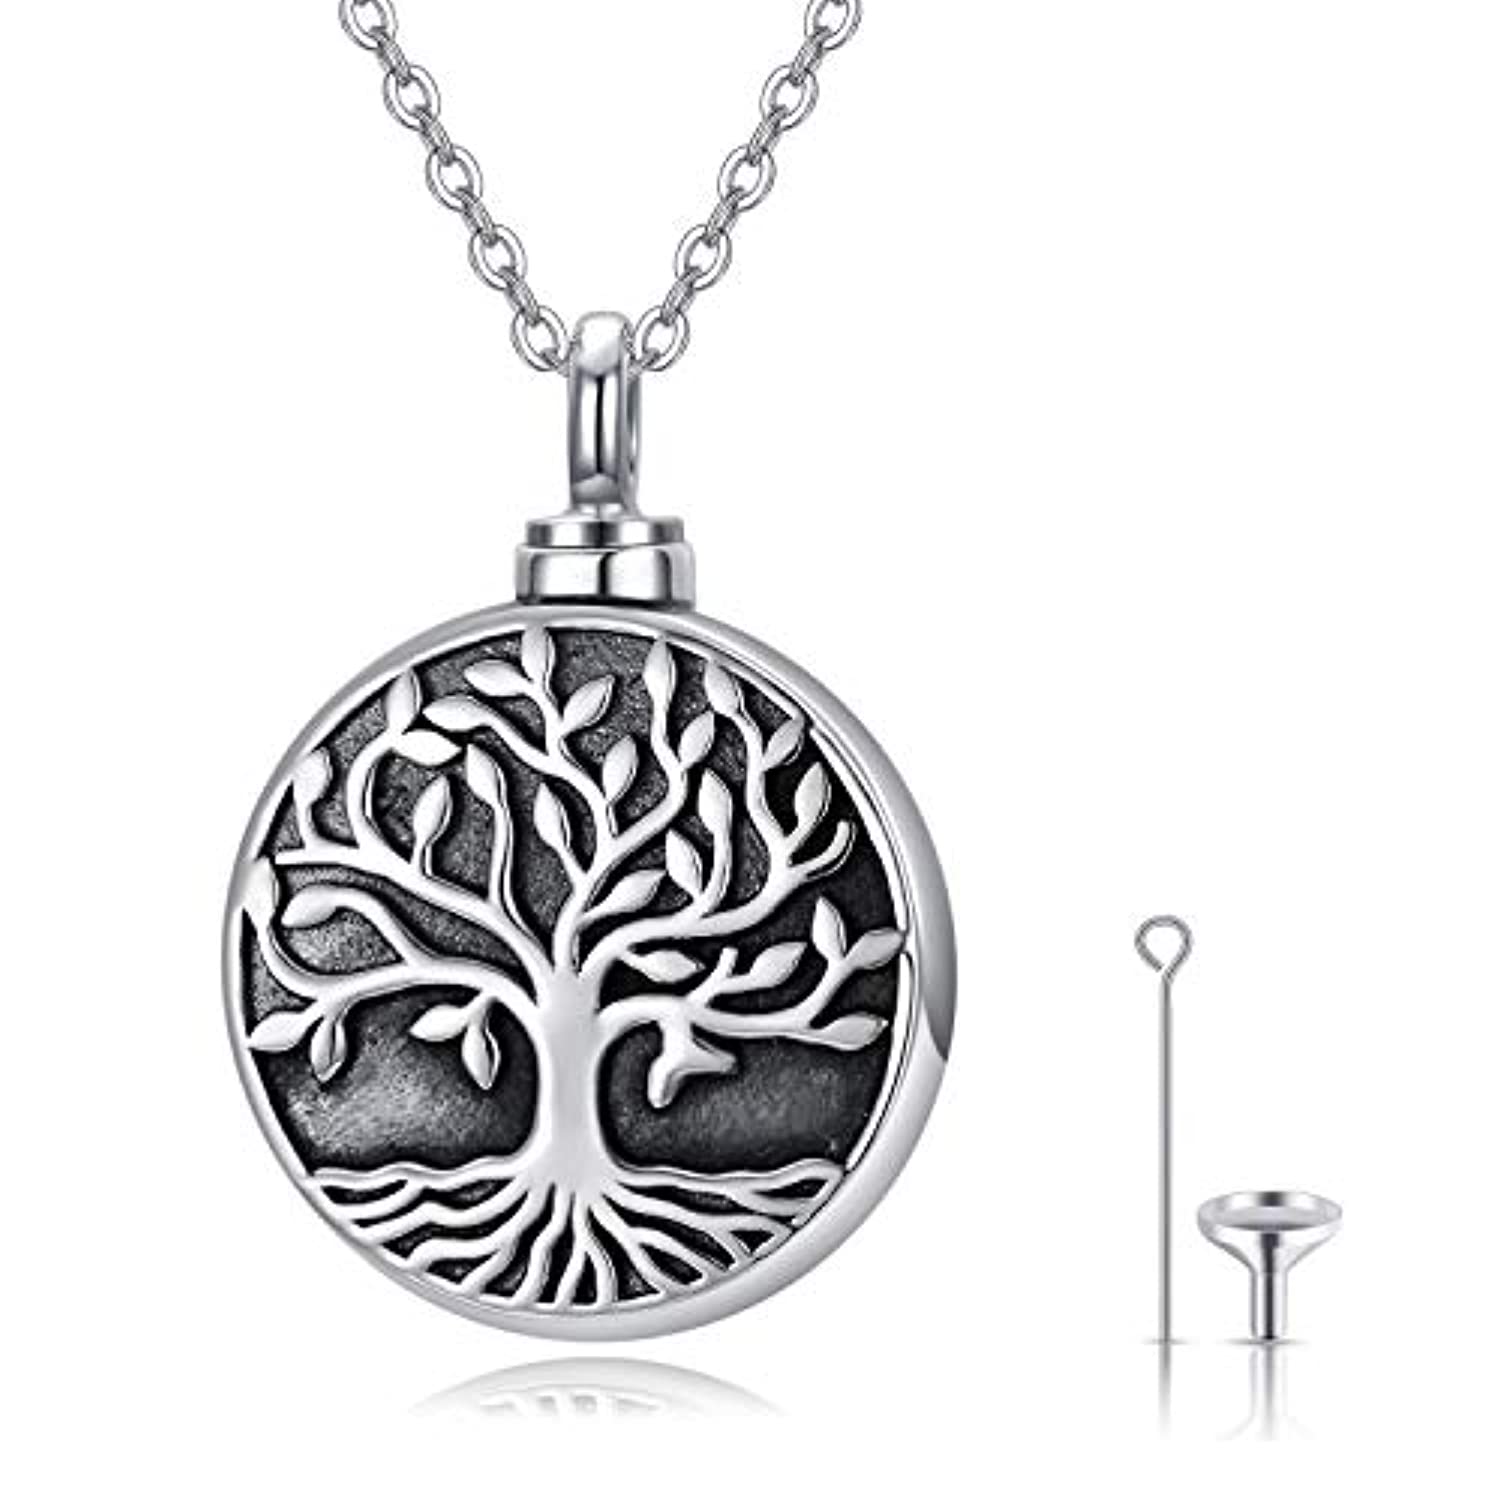 Mini Penny Tree of Life Necklace - The Copper Coin®